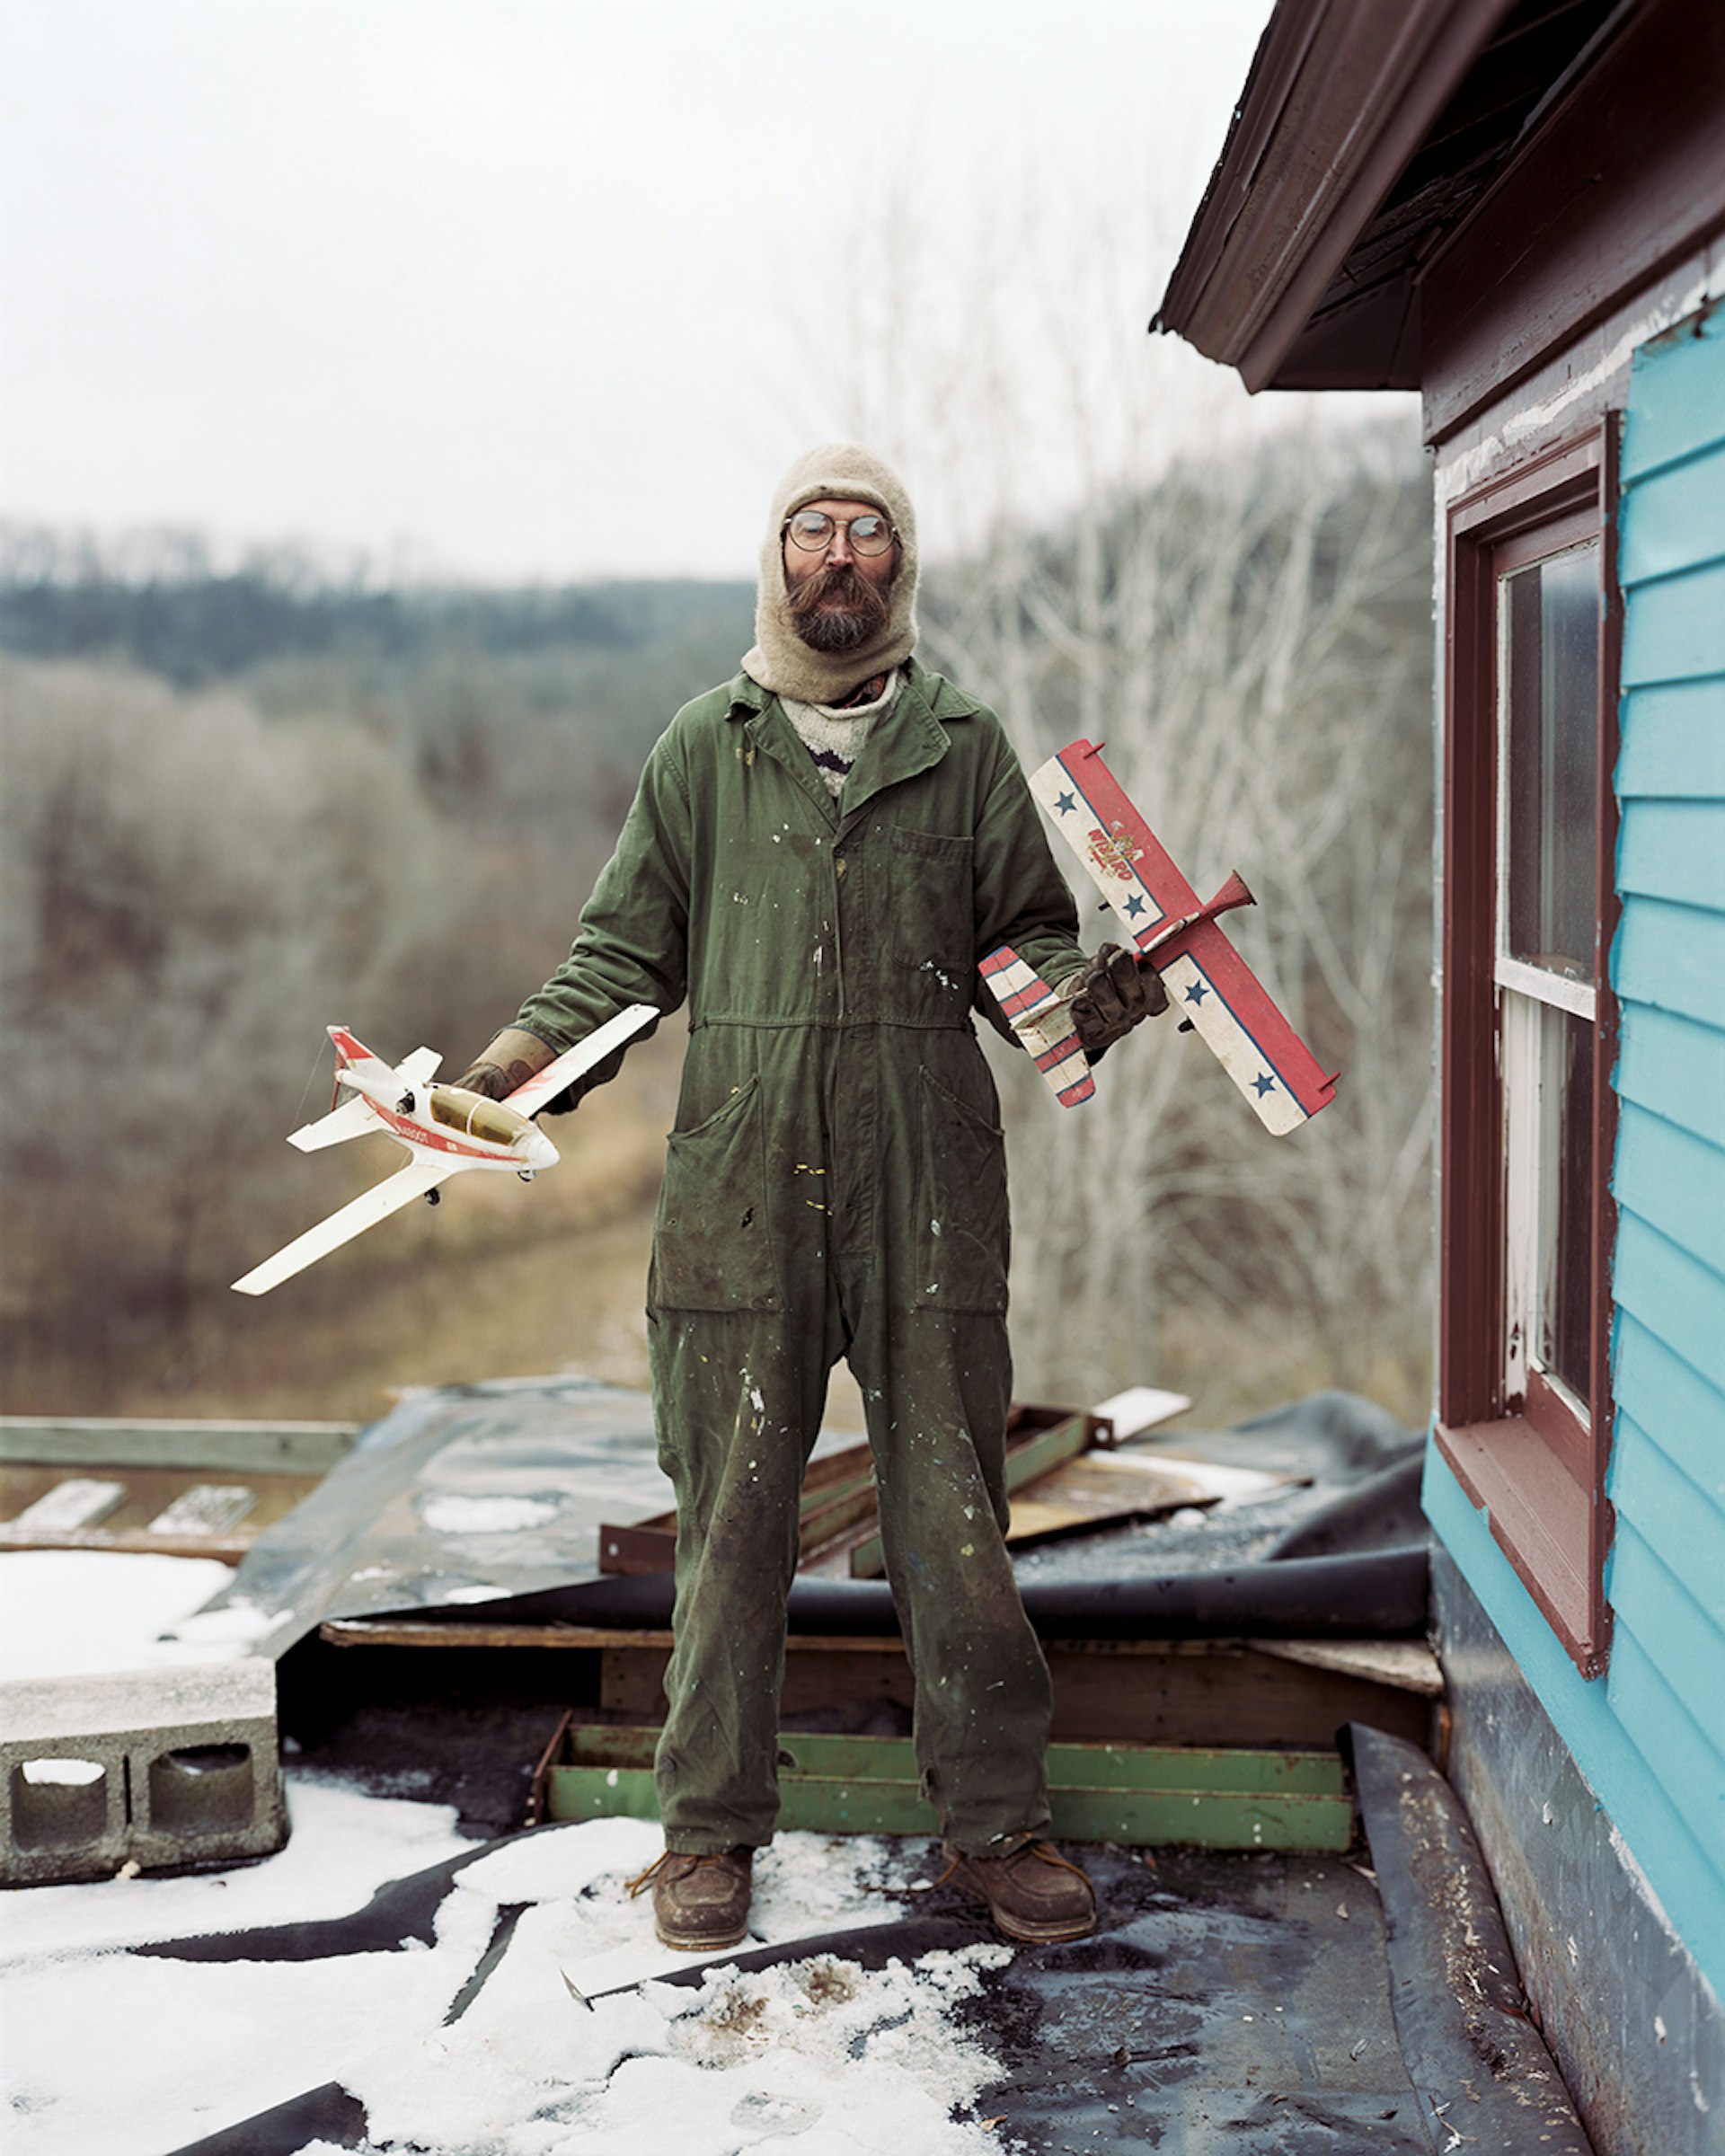 Alec Soth, ‘Charles, Vasa, Minnesota’ from Sleeping by the Mississippi (2017). Courtesy of the artist and MACK.